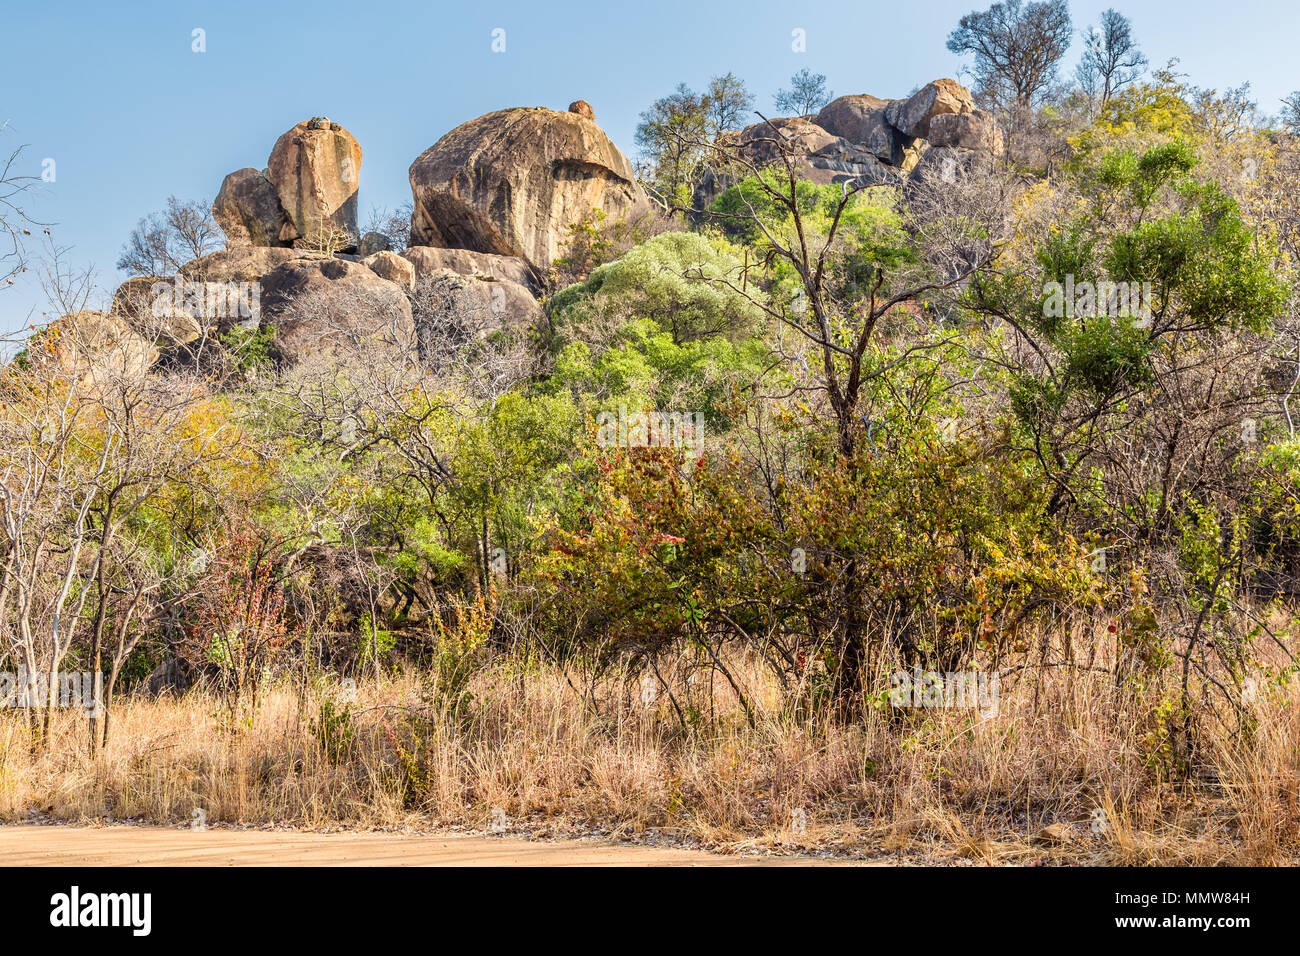 Balancing rocks in Matobo National Park, Zimbabwe, formed by millions of years of weathering. September 11, 2016. Stock Photo